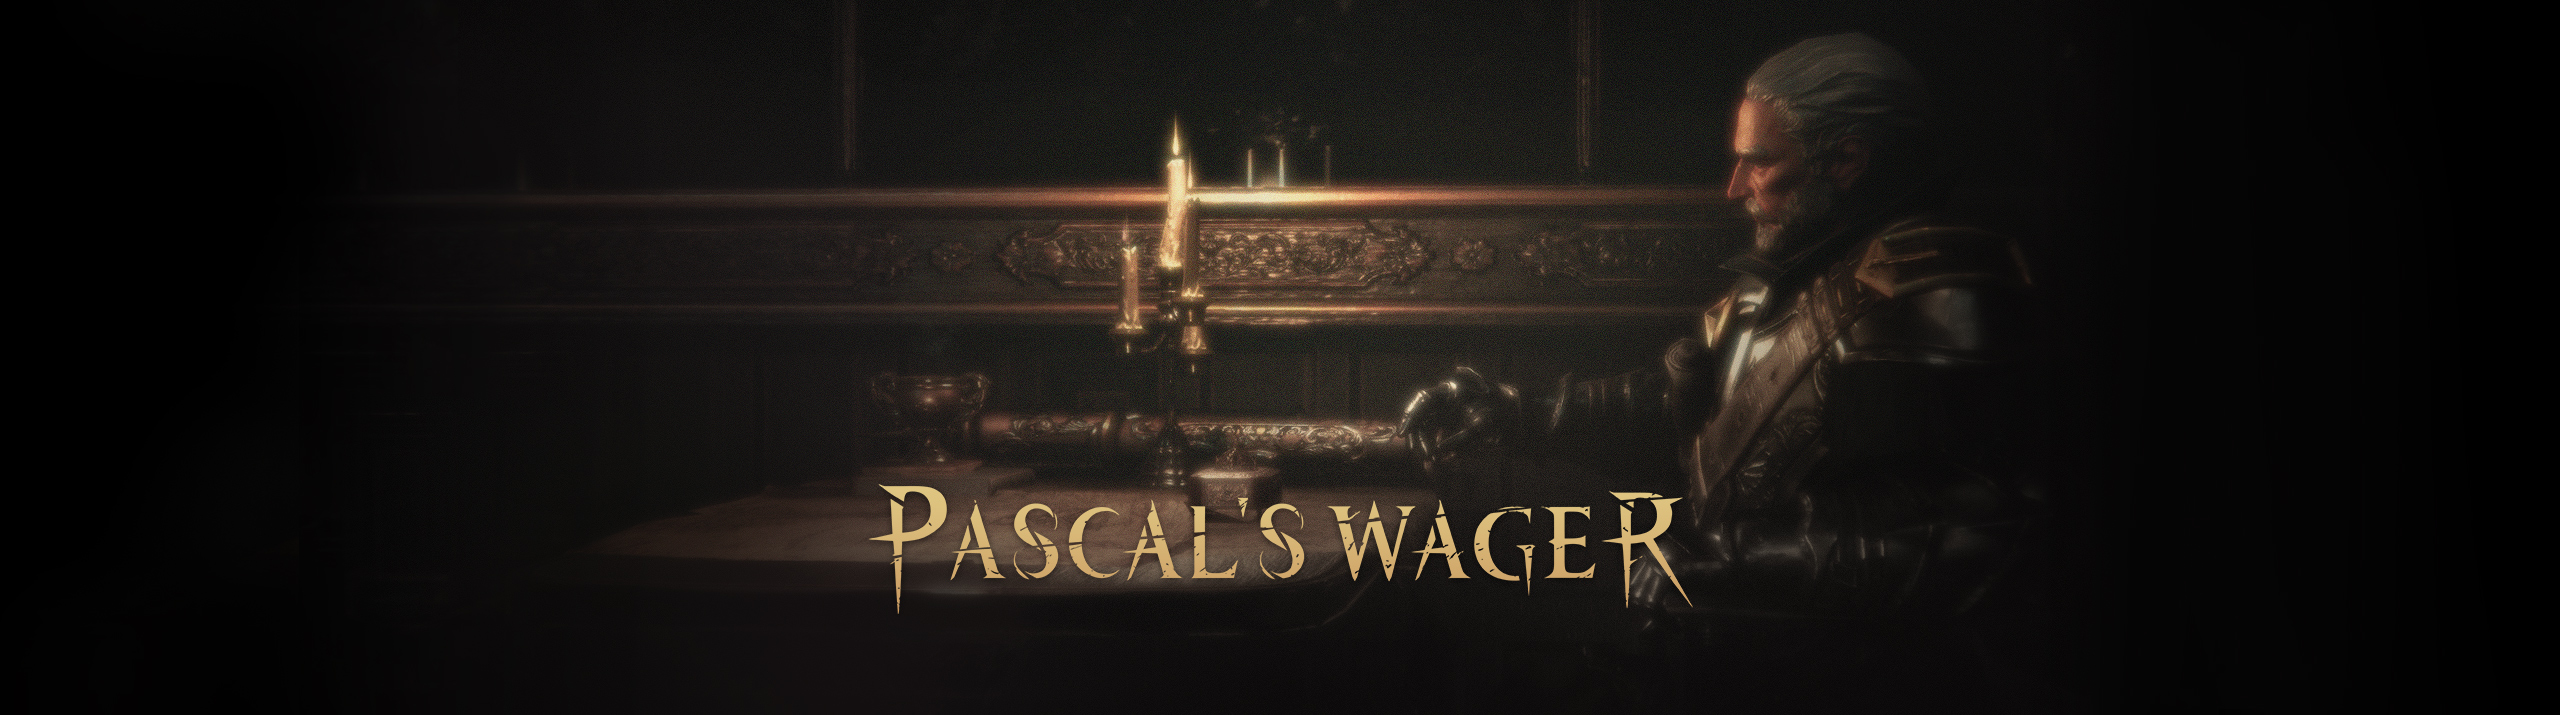 PASCALS WAGER